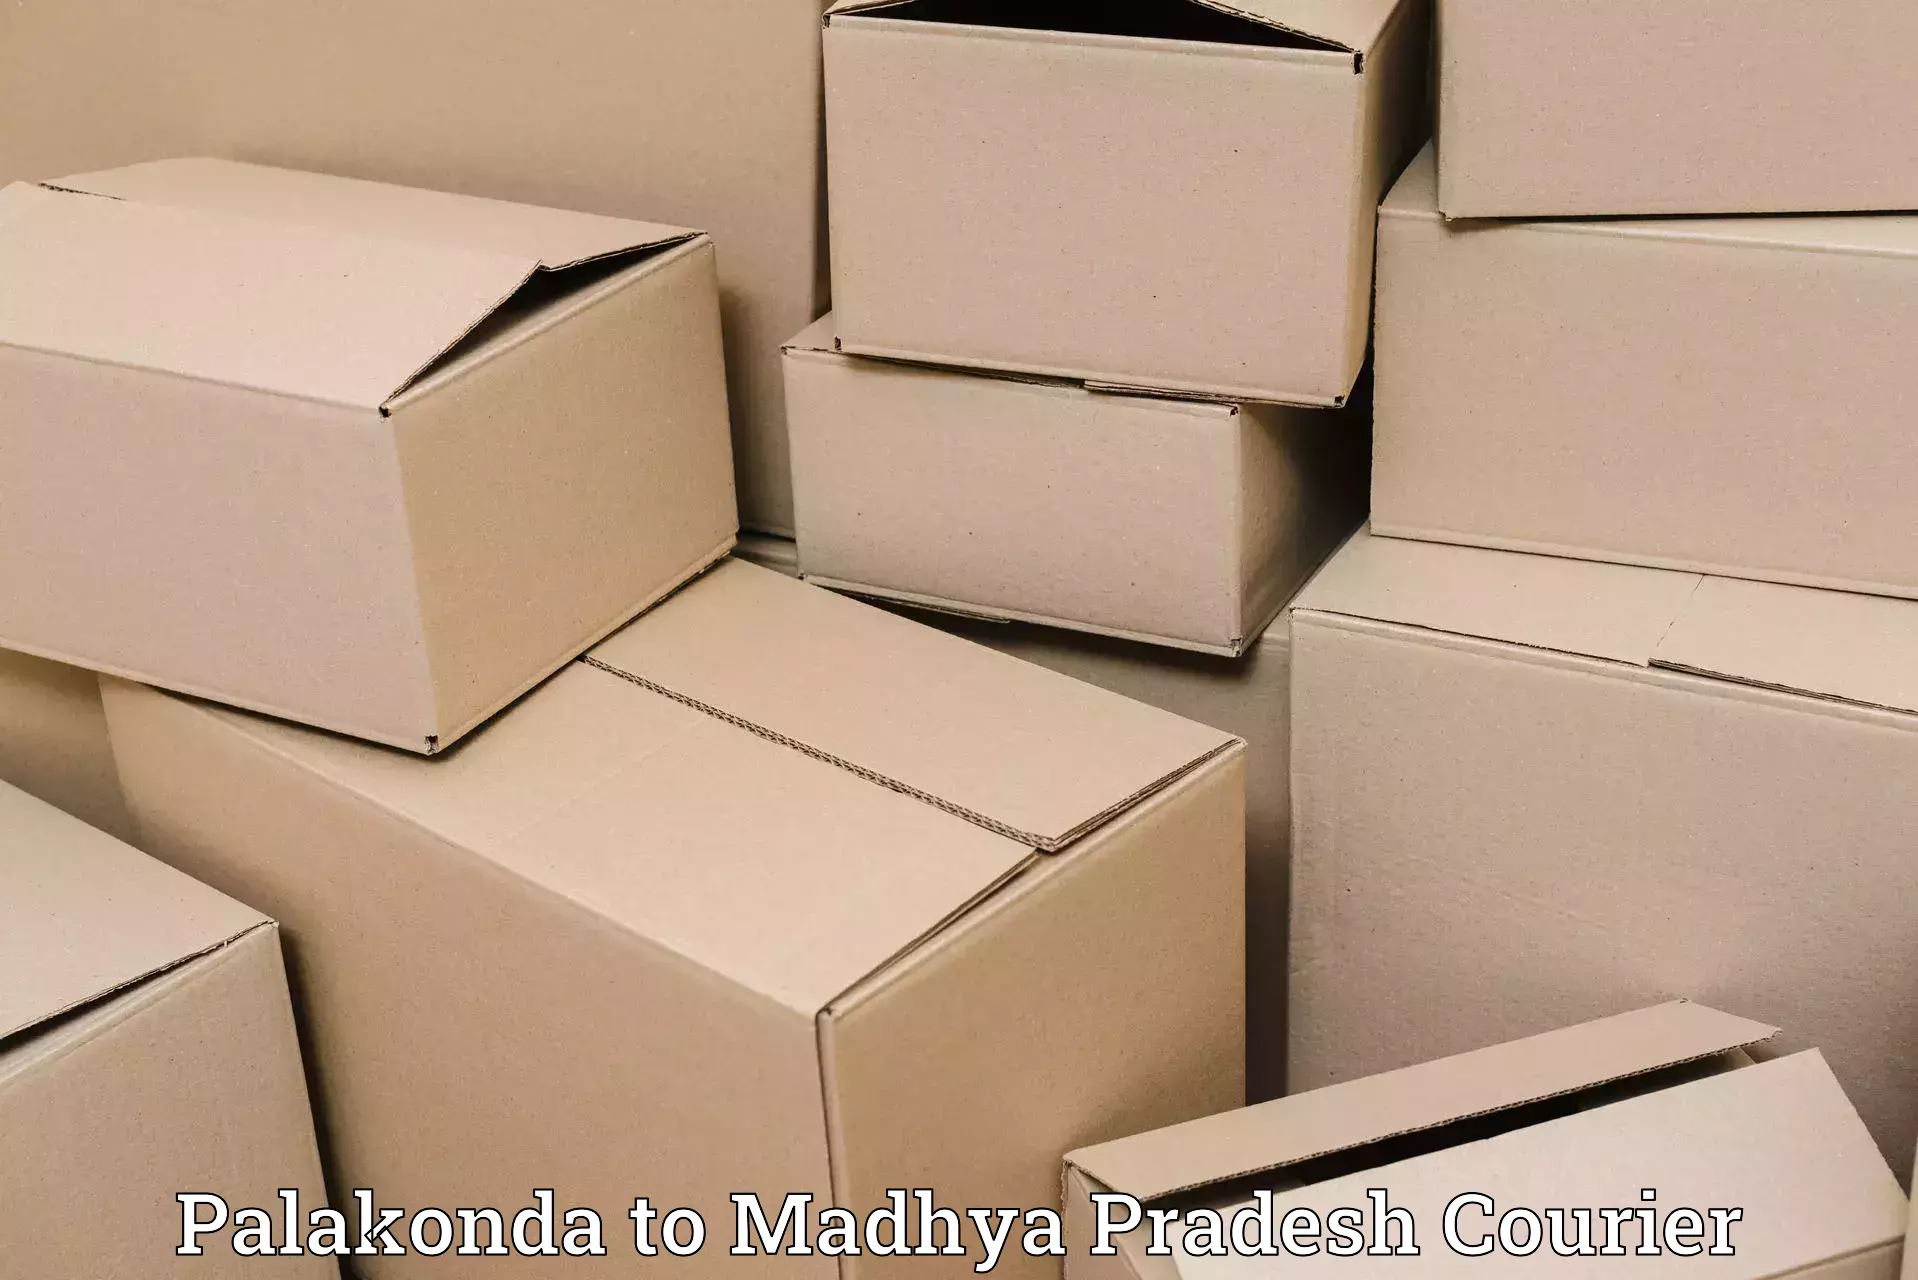 Subscription-based courier Palakonda to Jawad Neemuch